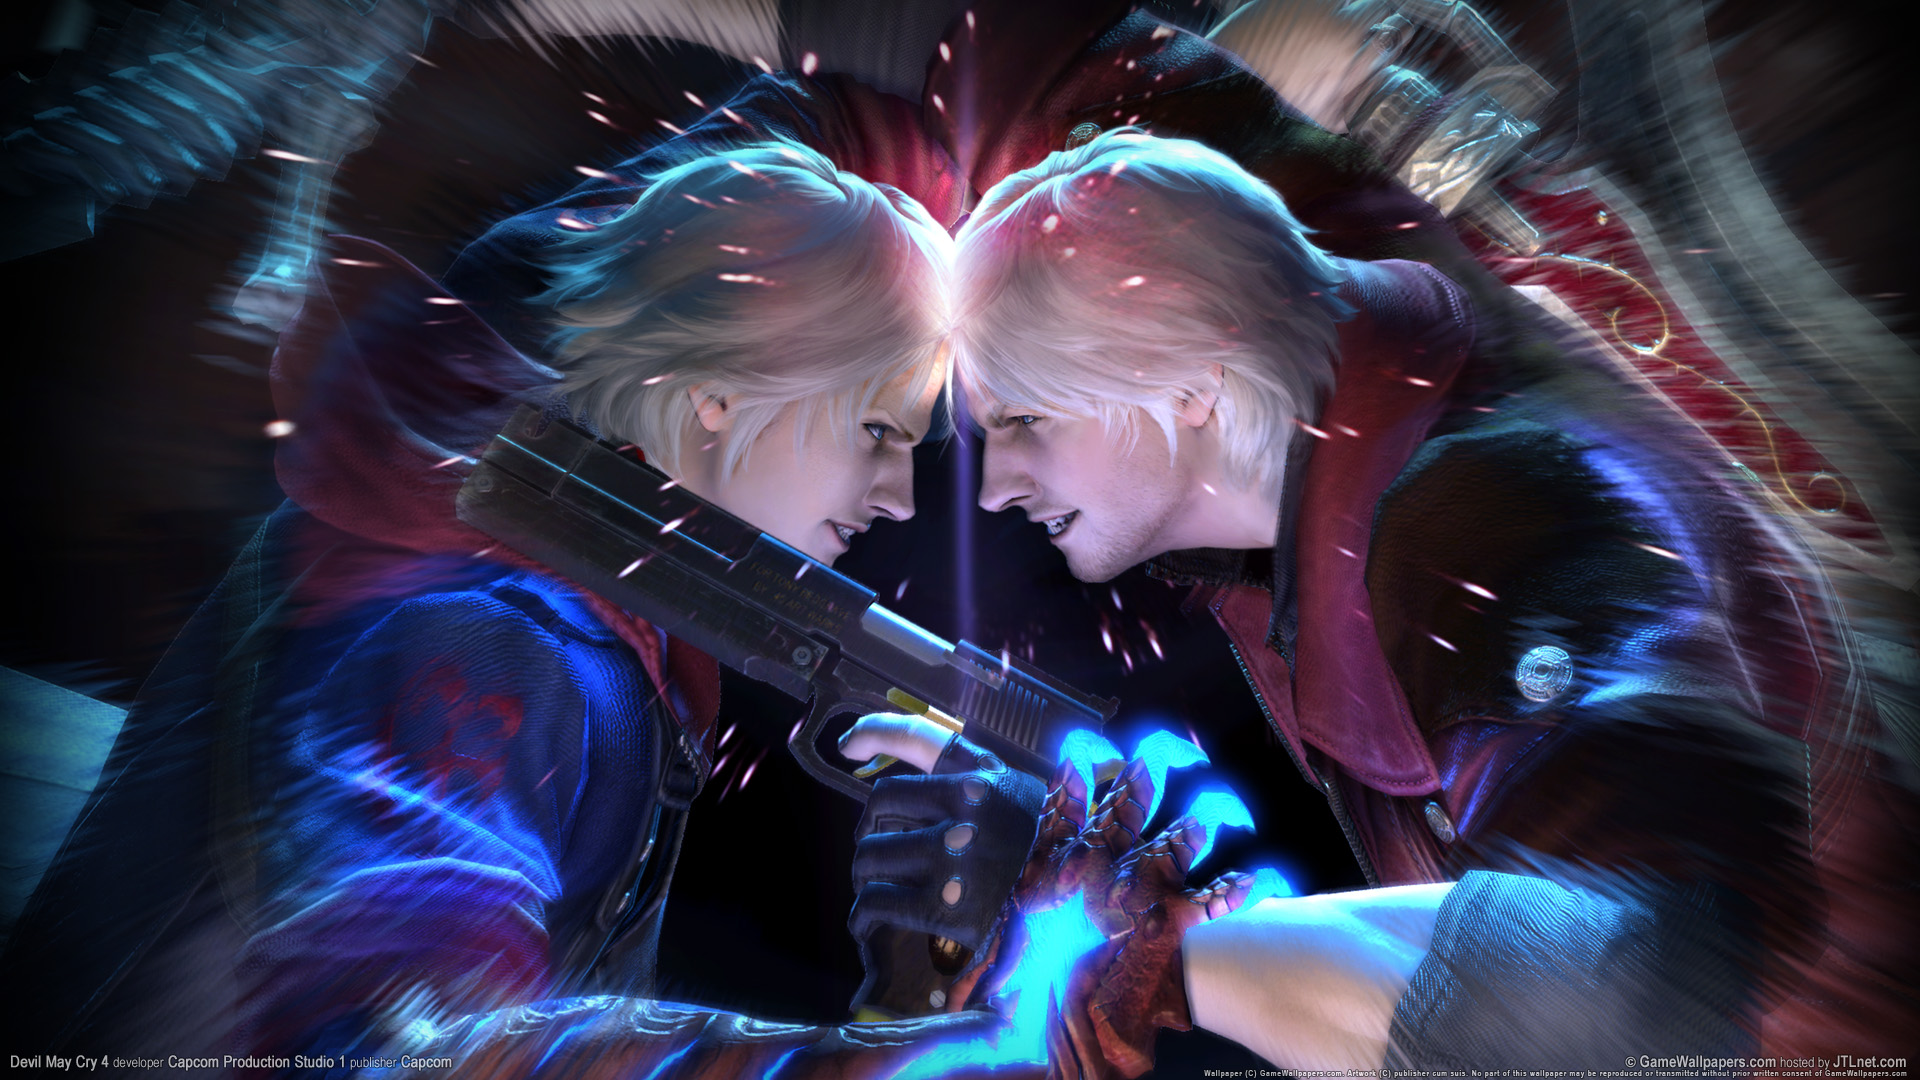 Game Devil May Cry 5  Nero Vergil Dante Wallpaper Poster 24 x 14 inches